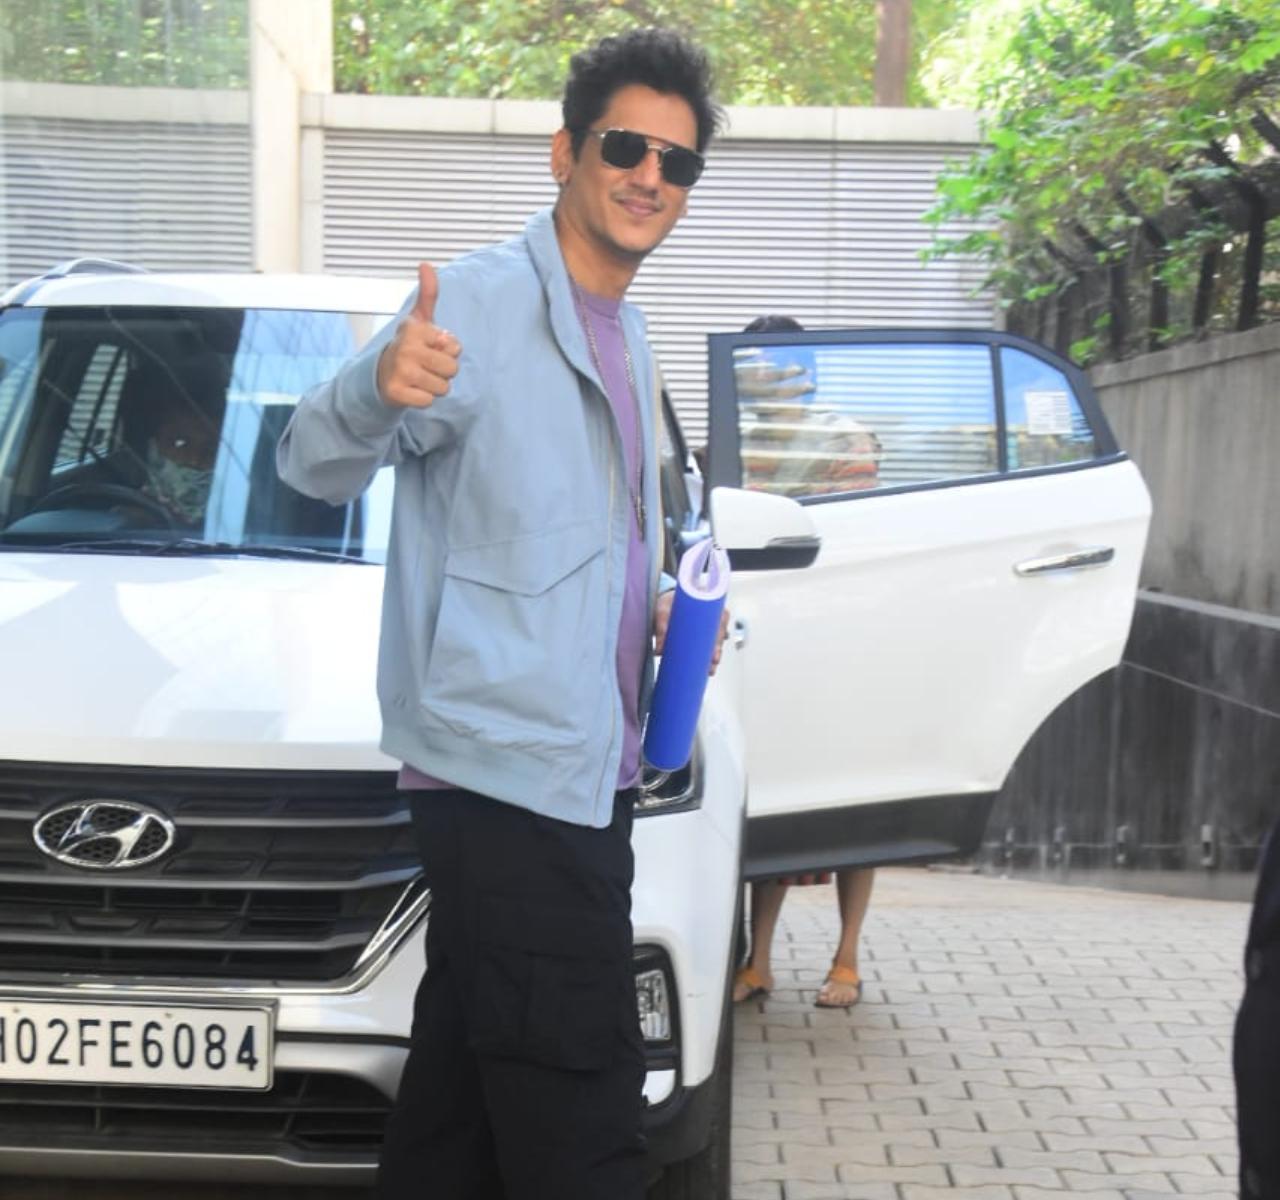 Gully Boy star Vijay Verma was snapped outside Red Chilles office in Bandra. On the work front, Vijay was last seen in web series Mirzapur 2.